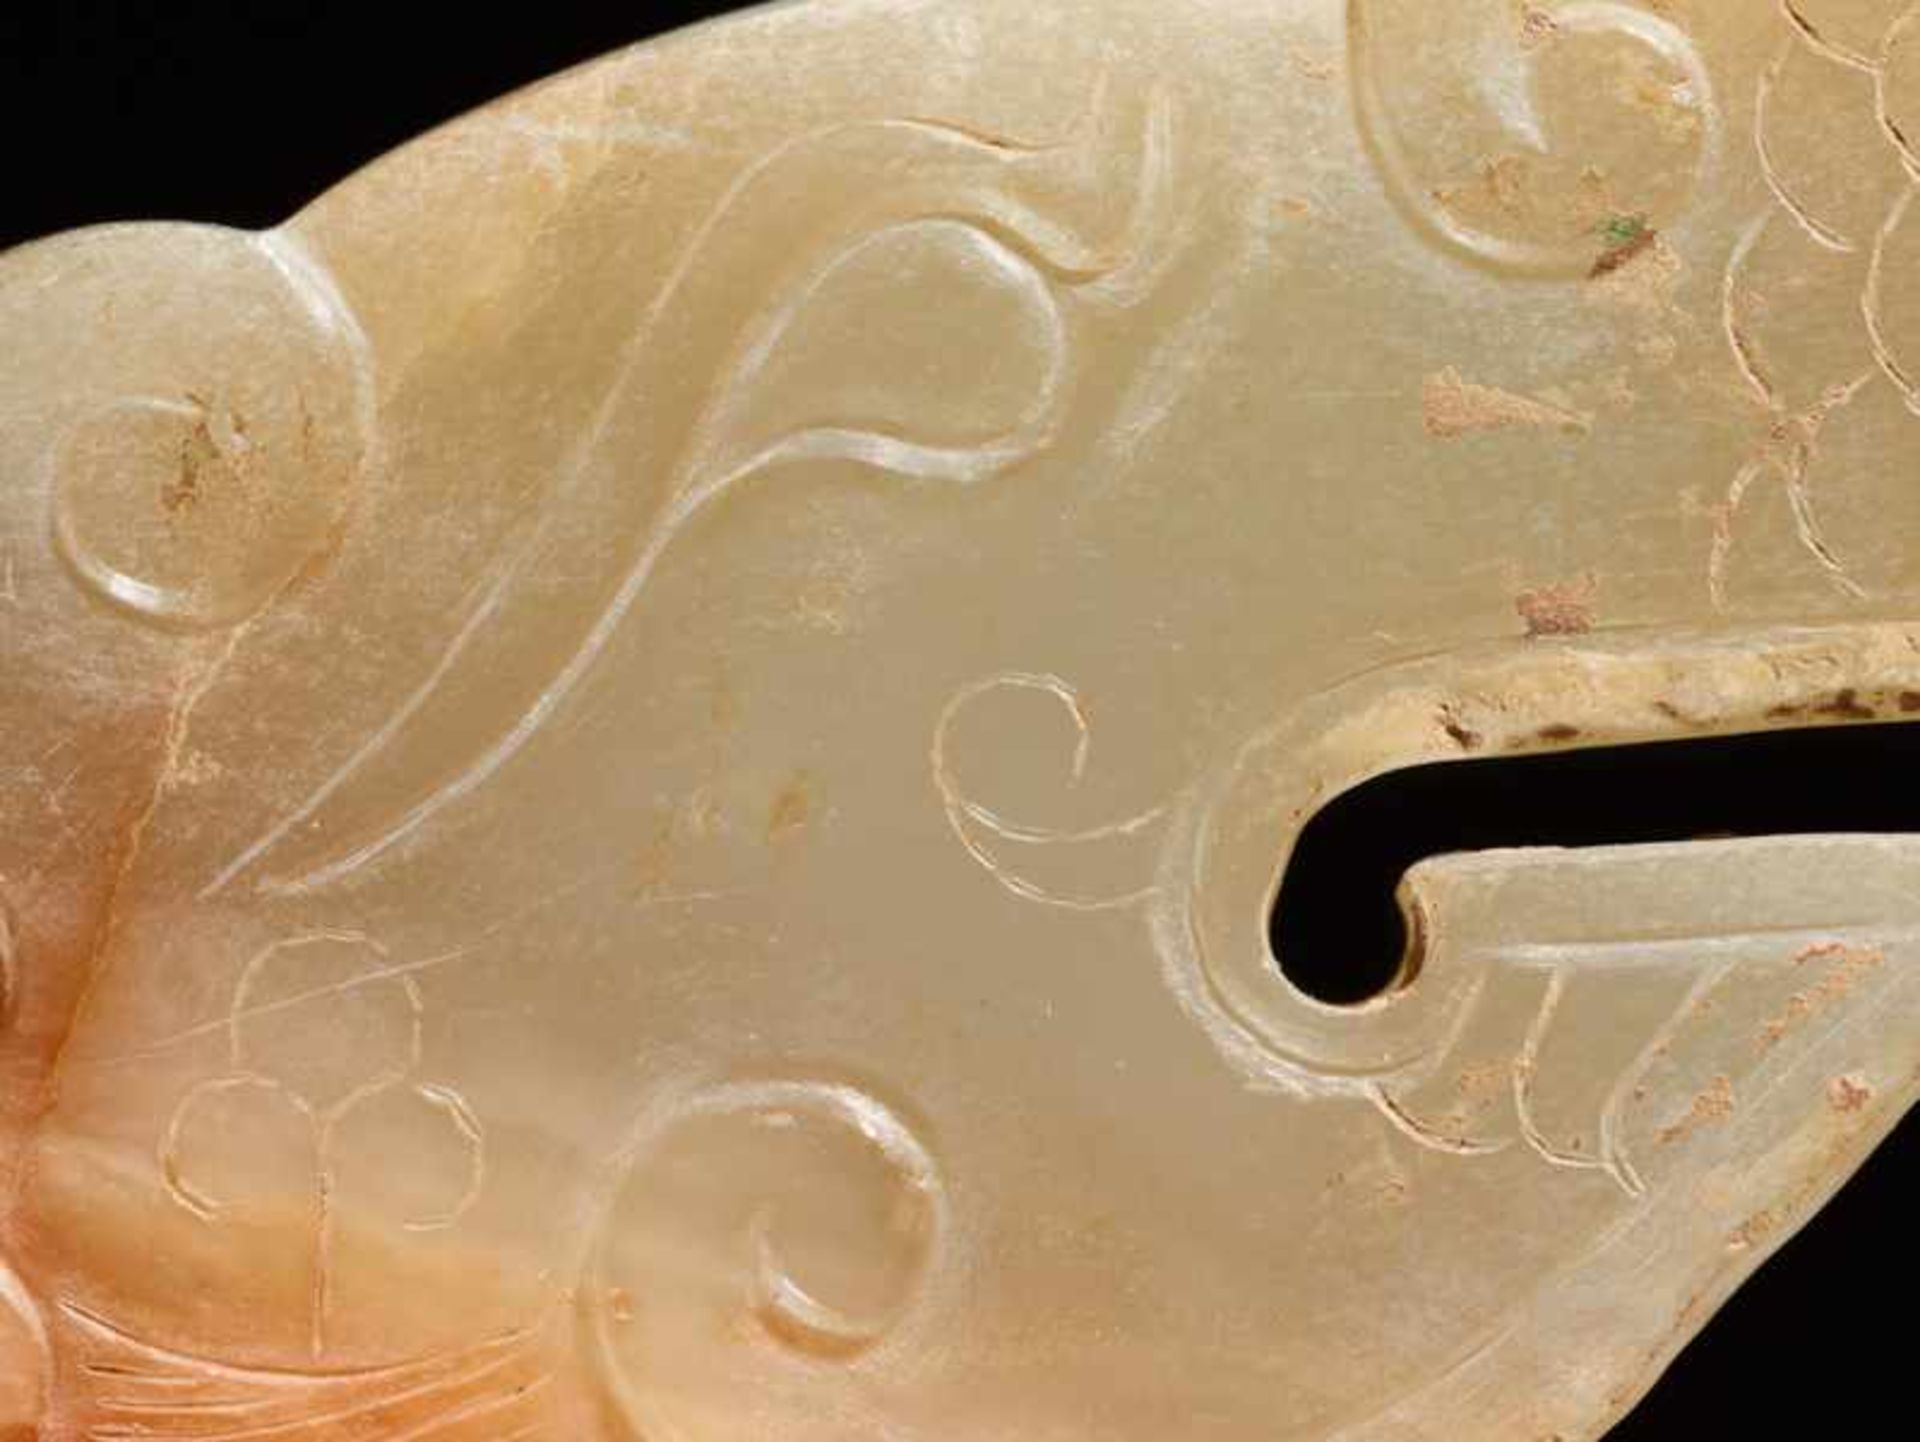 A SUPERB AND EXTREMELY RARE LARGE DRAGON-SHAPED PLAQUE CARVED IN WHITE JADE Jade. China, EASTERN - Image 8 of 8